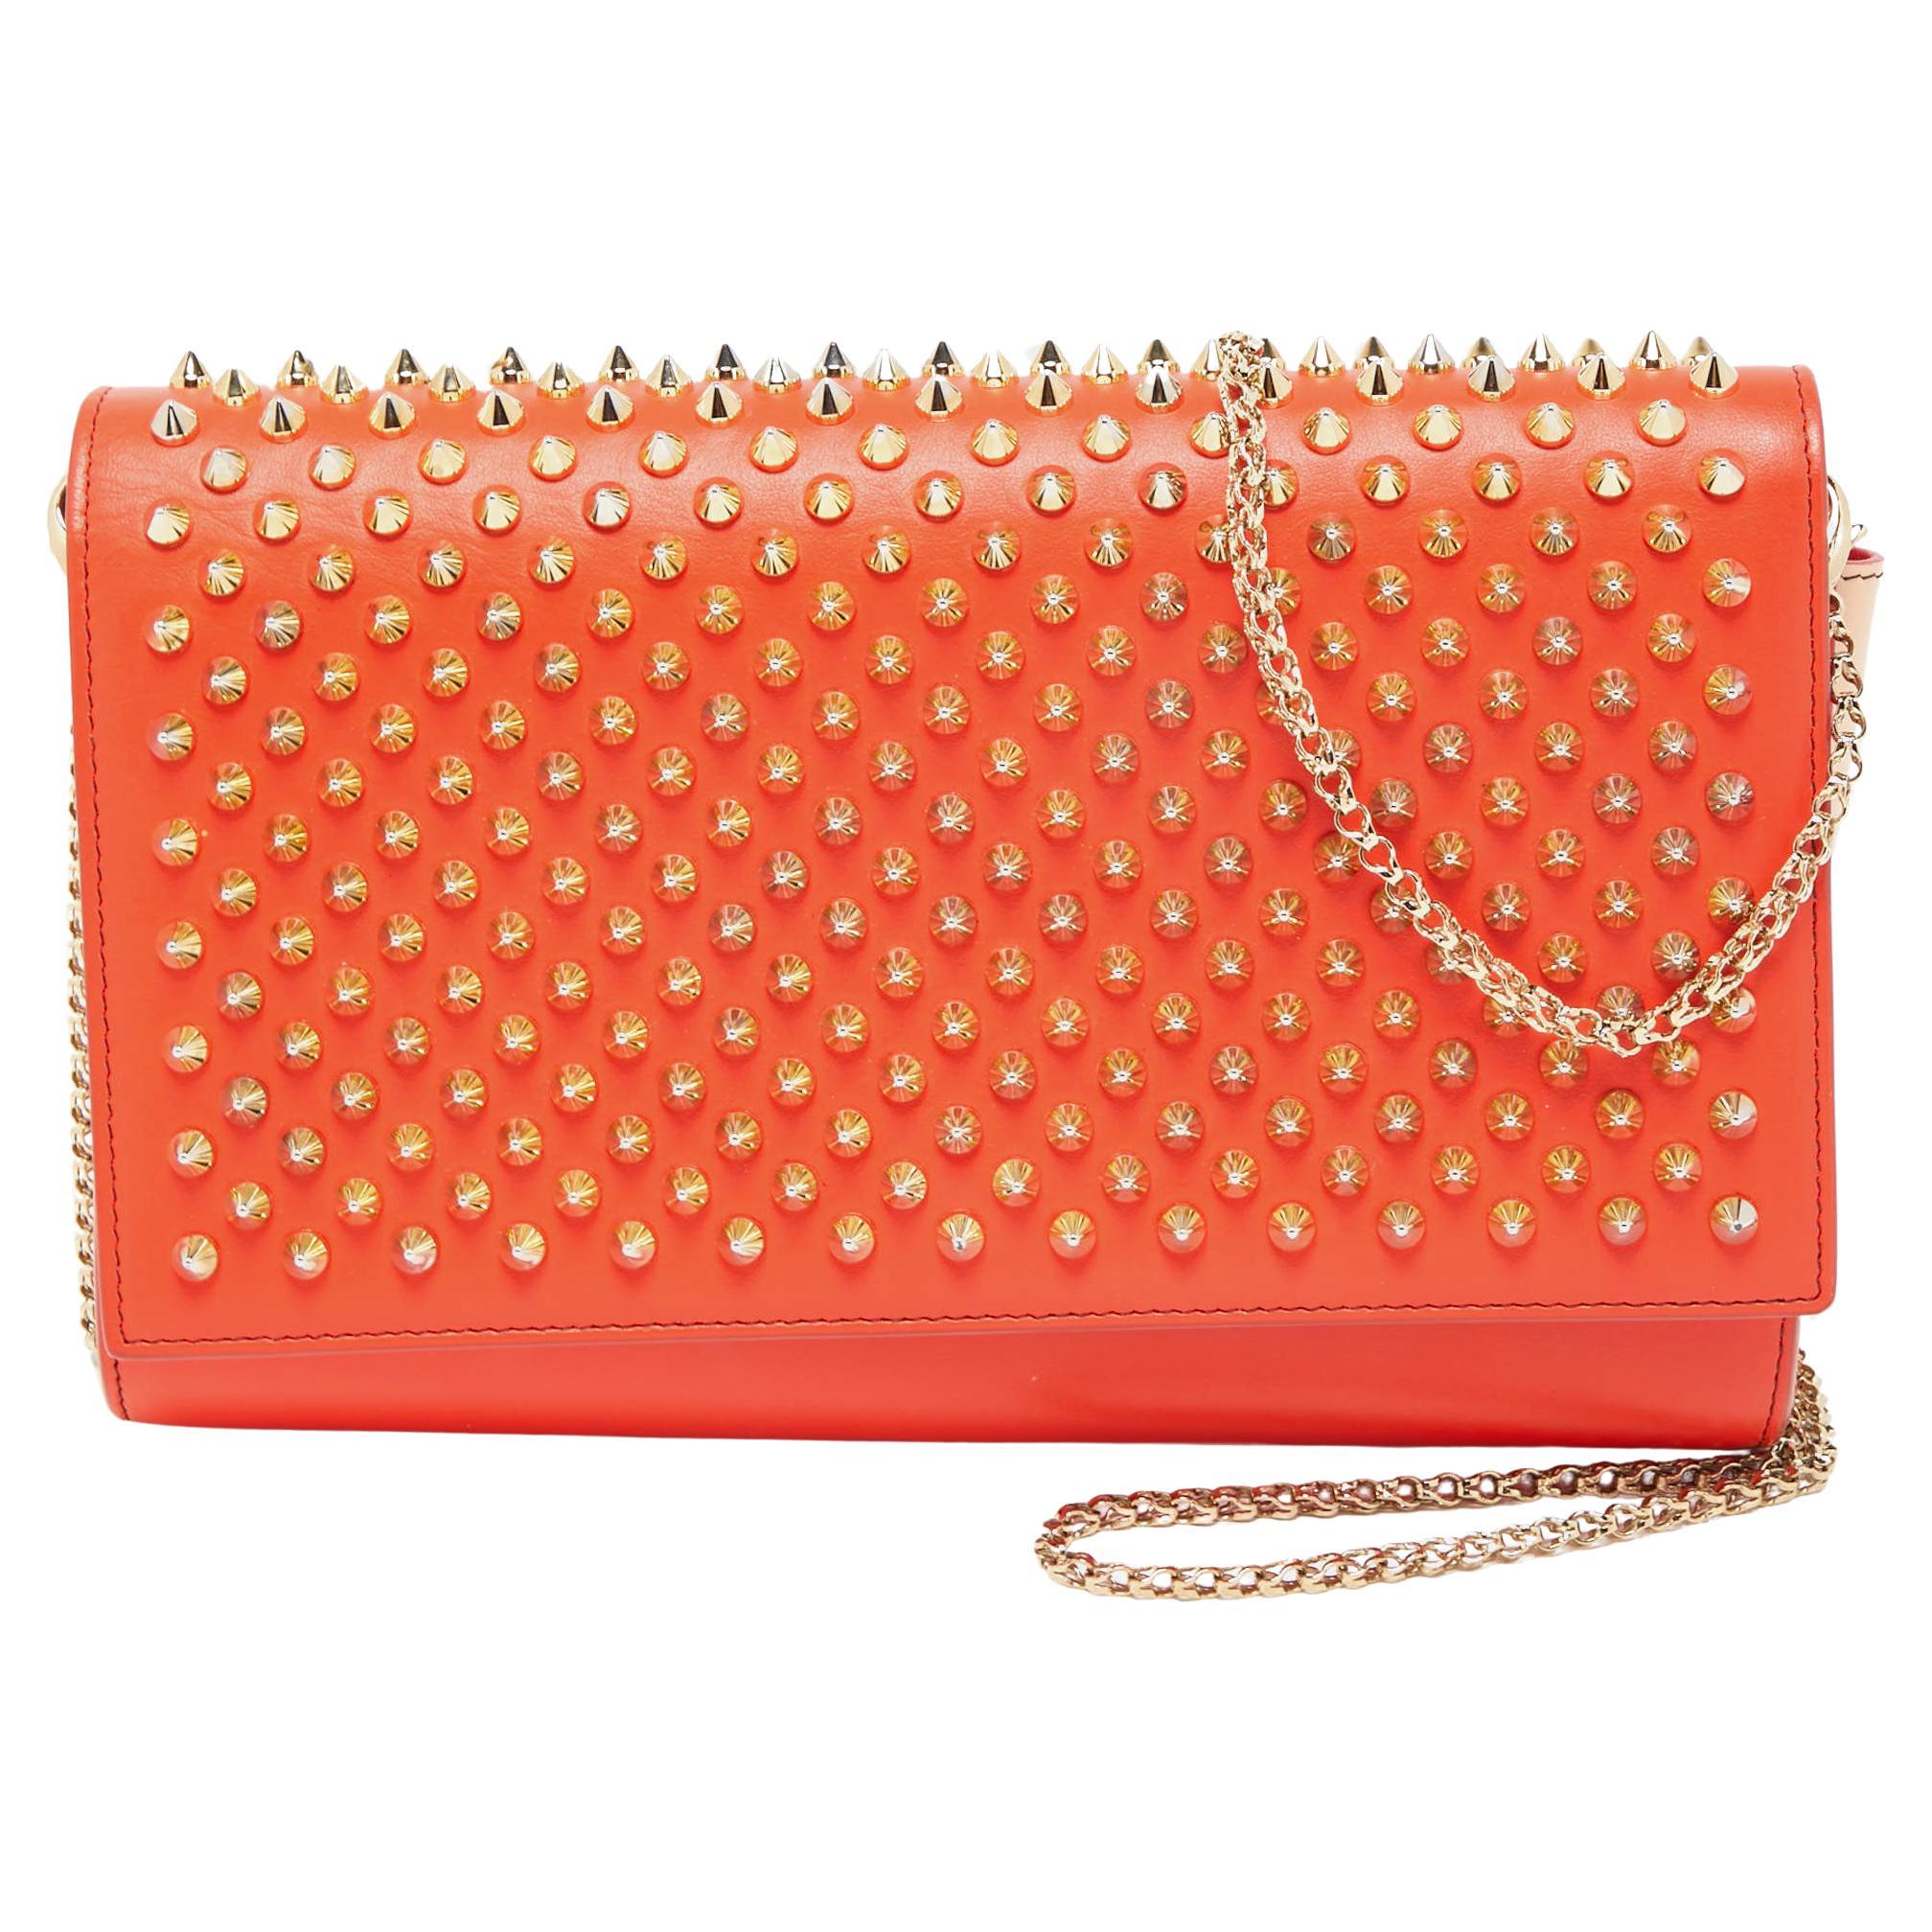 Christian Louboutin Black Genuine Leather Spikes Clutch Bag with Storage  Bags